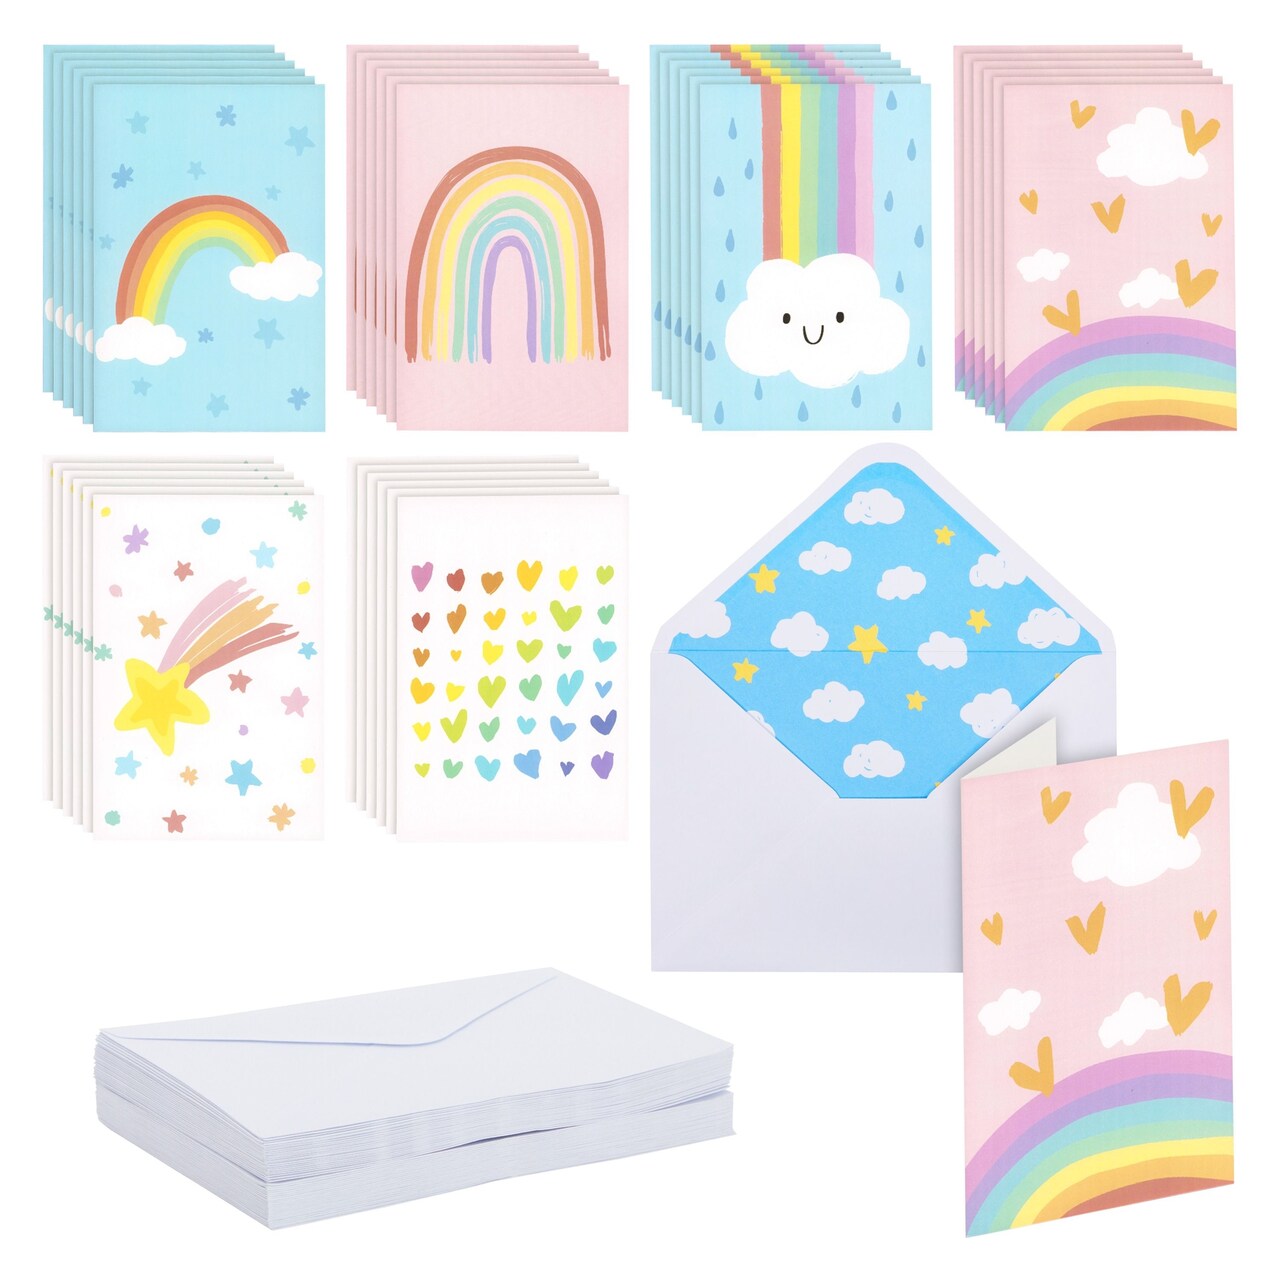 48 Pack Pastel Rainbow Thank You Cards, 4x6 Blank Cards and